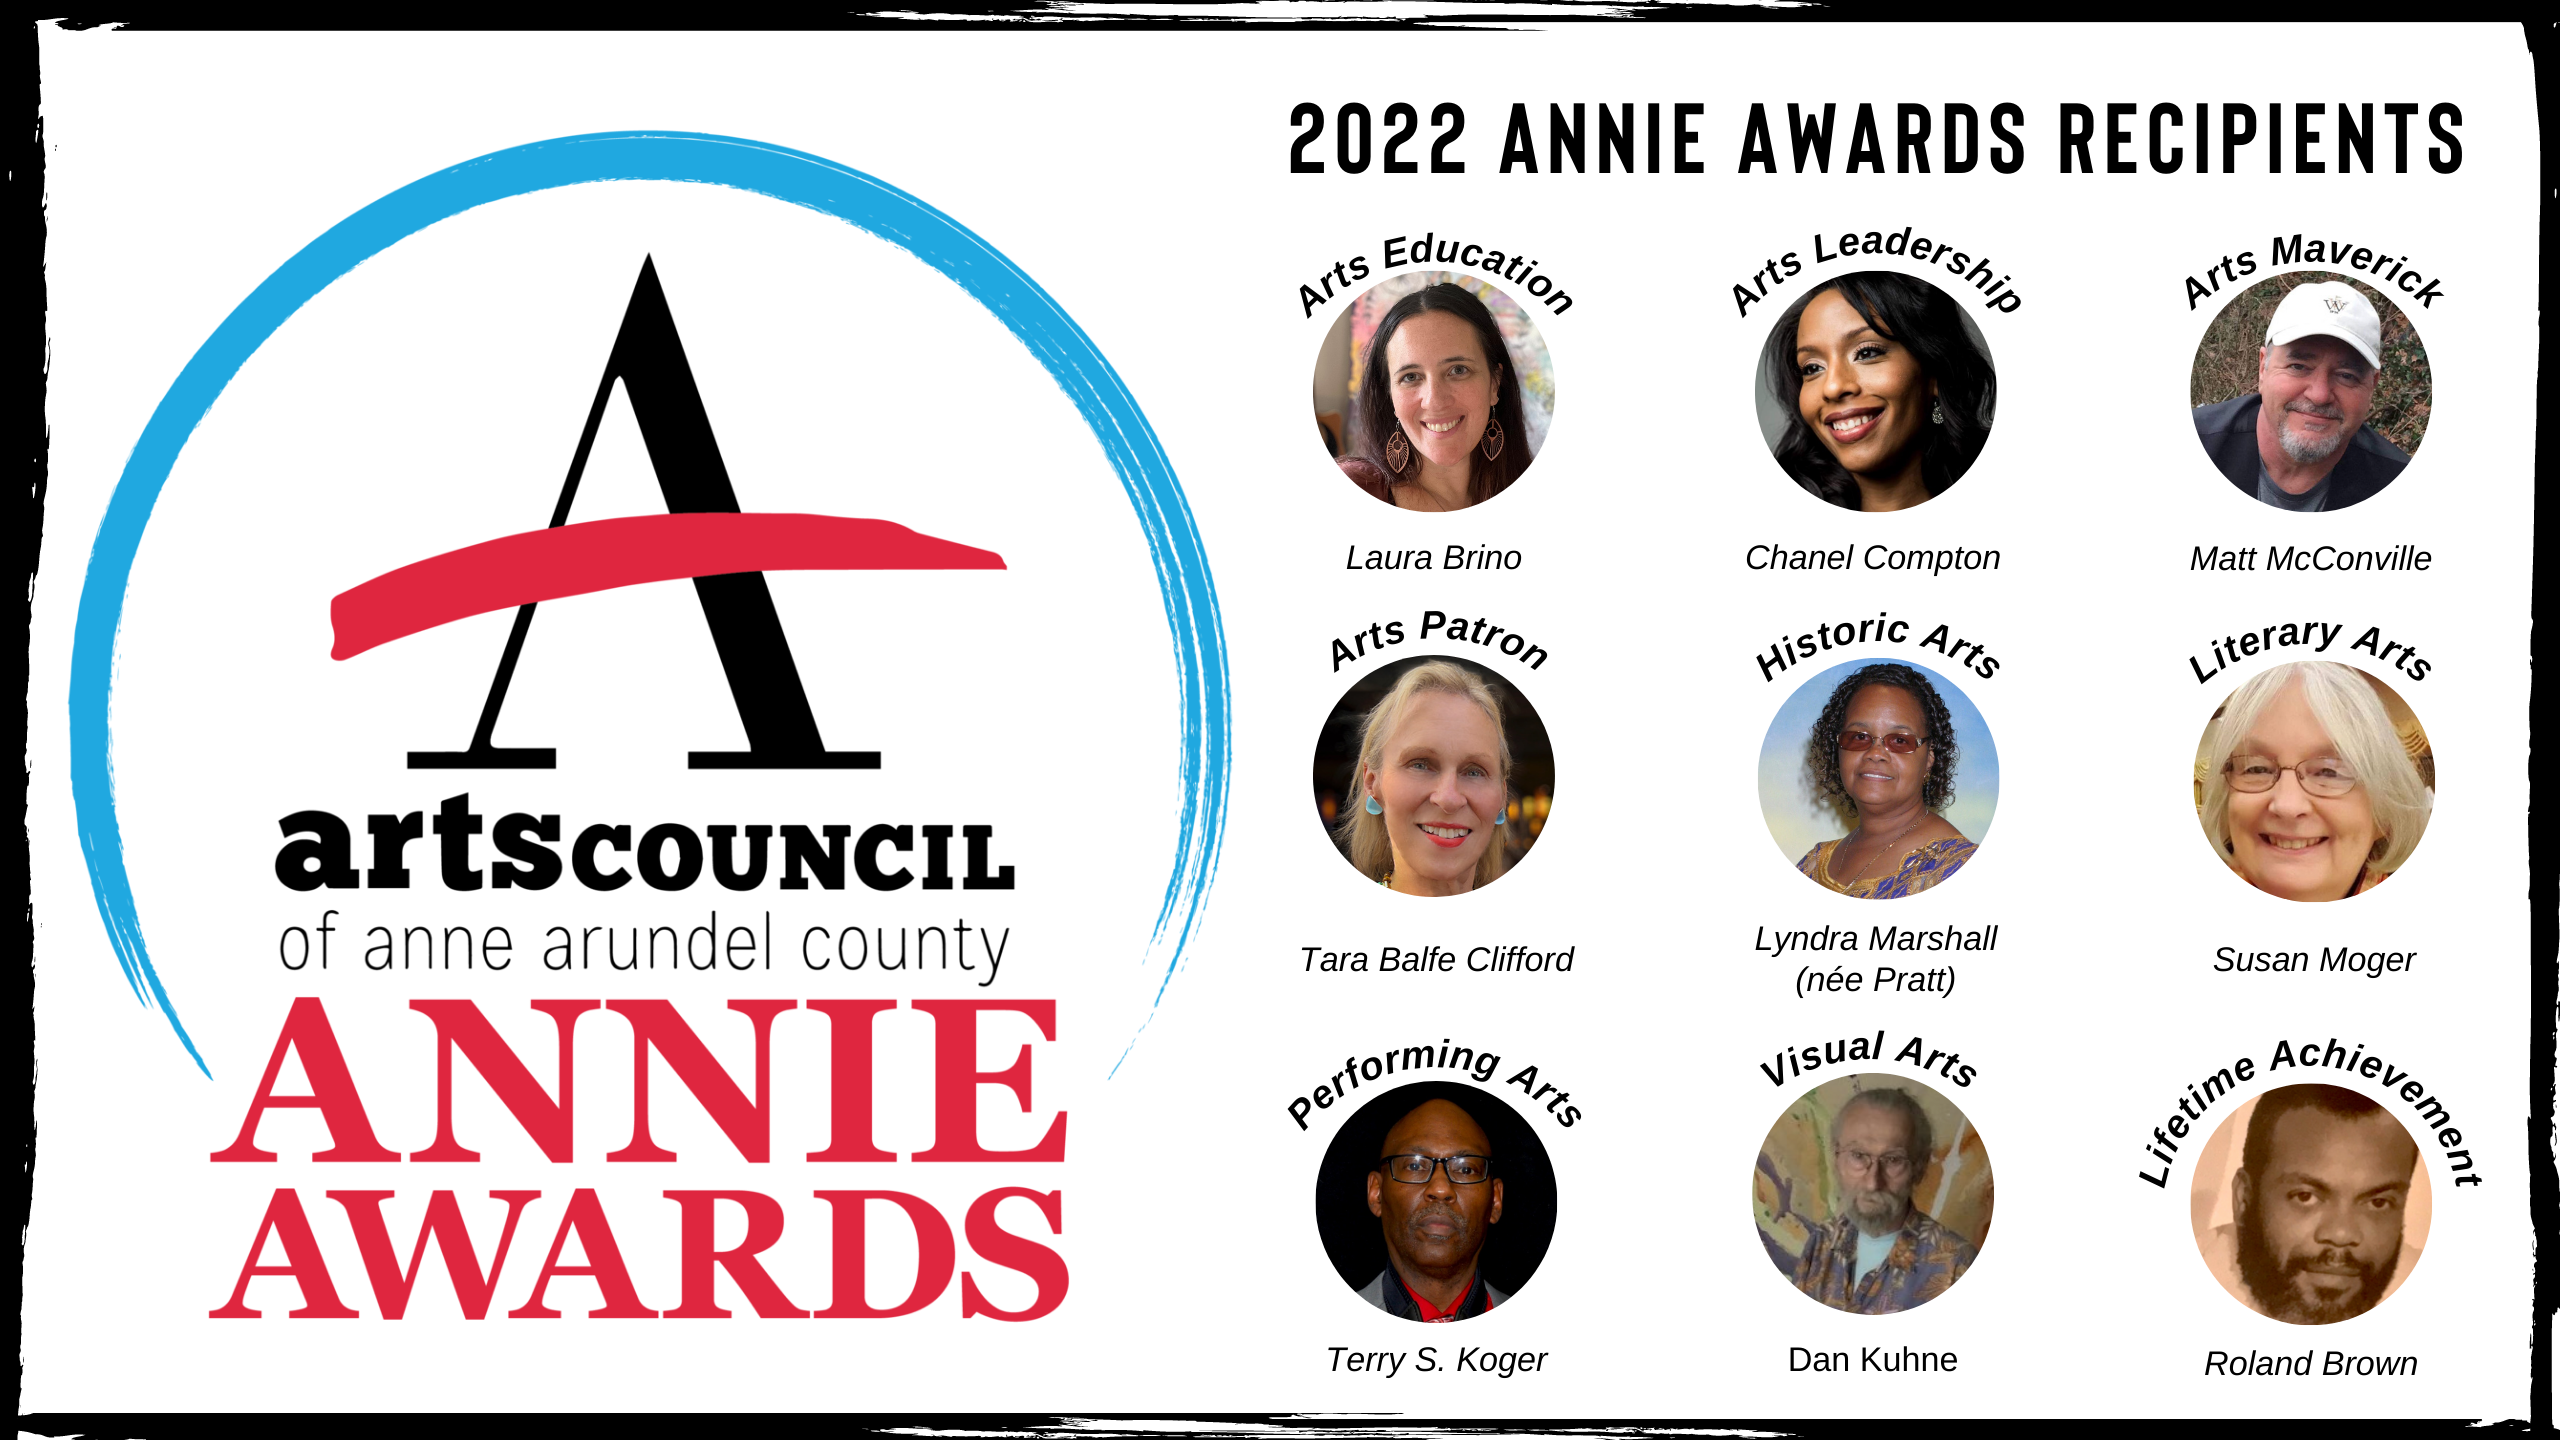 Annie Awards Arts Council of Anne Arundel County